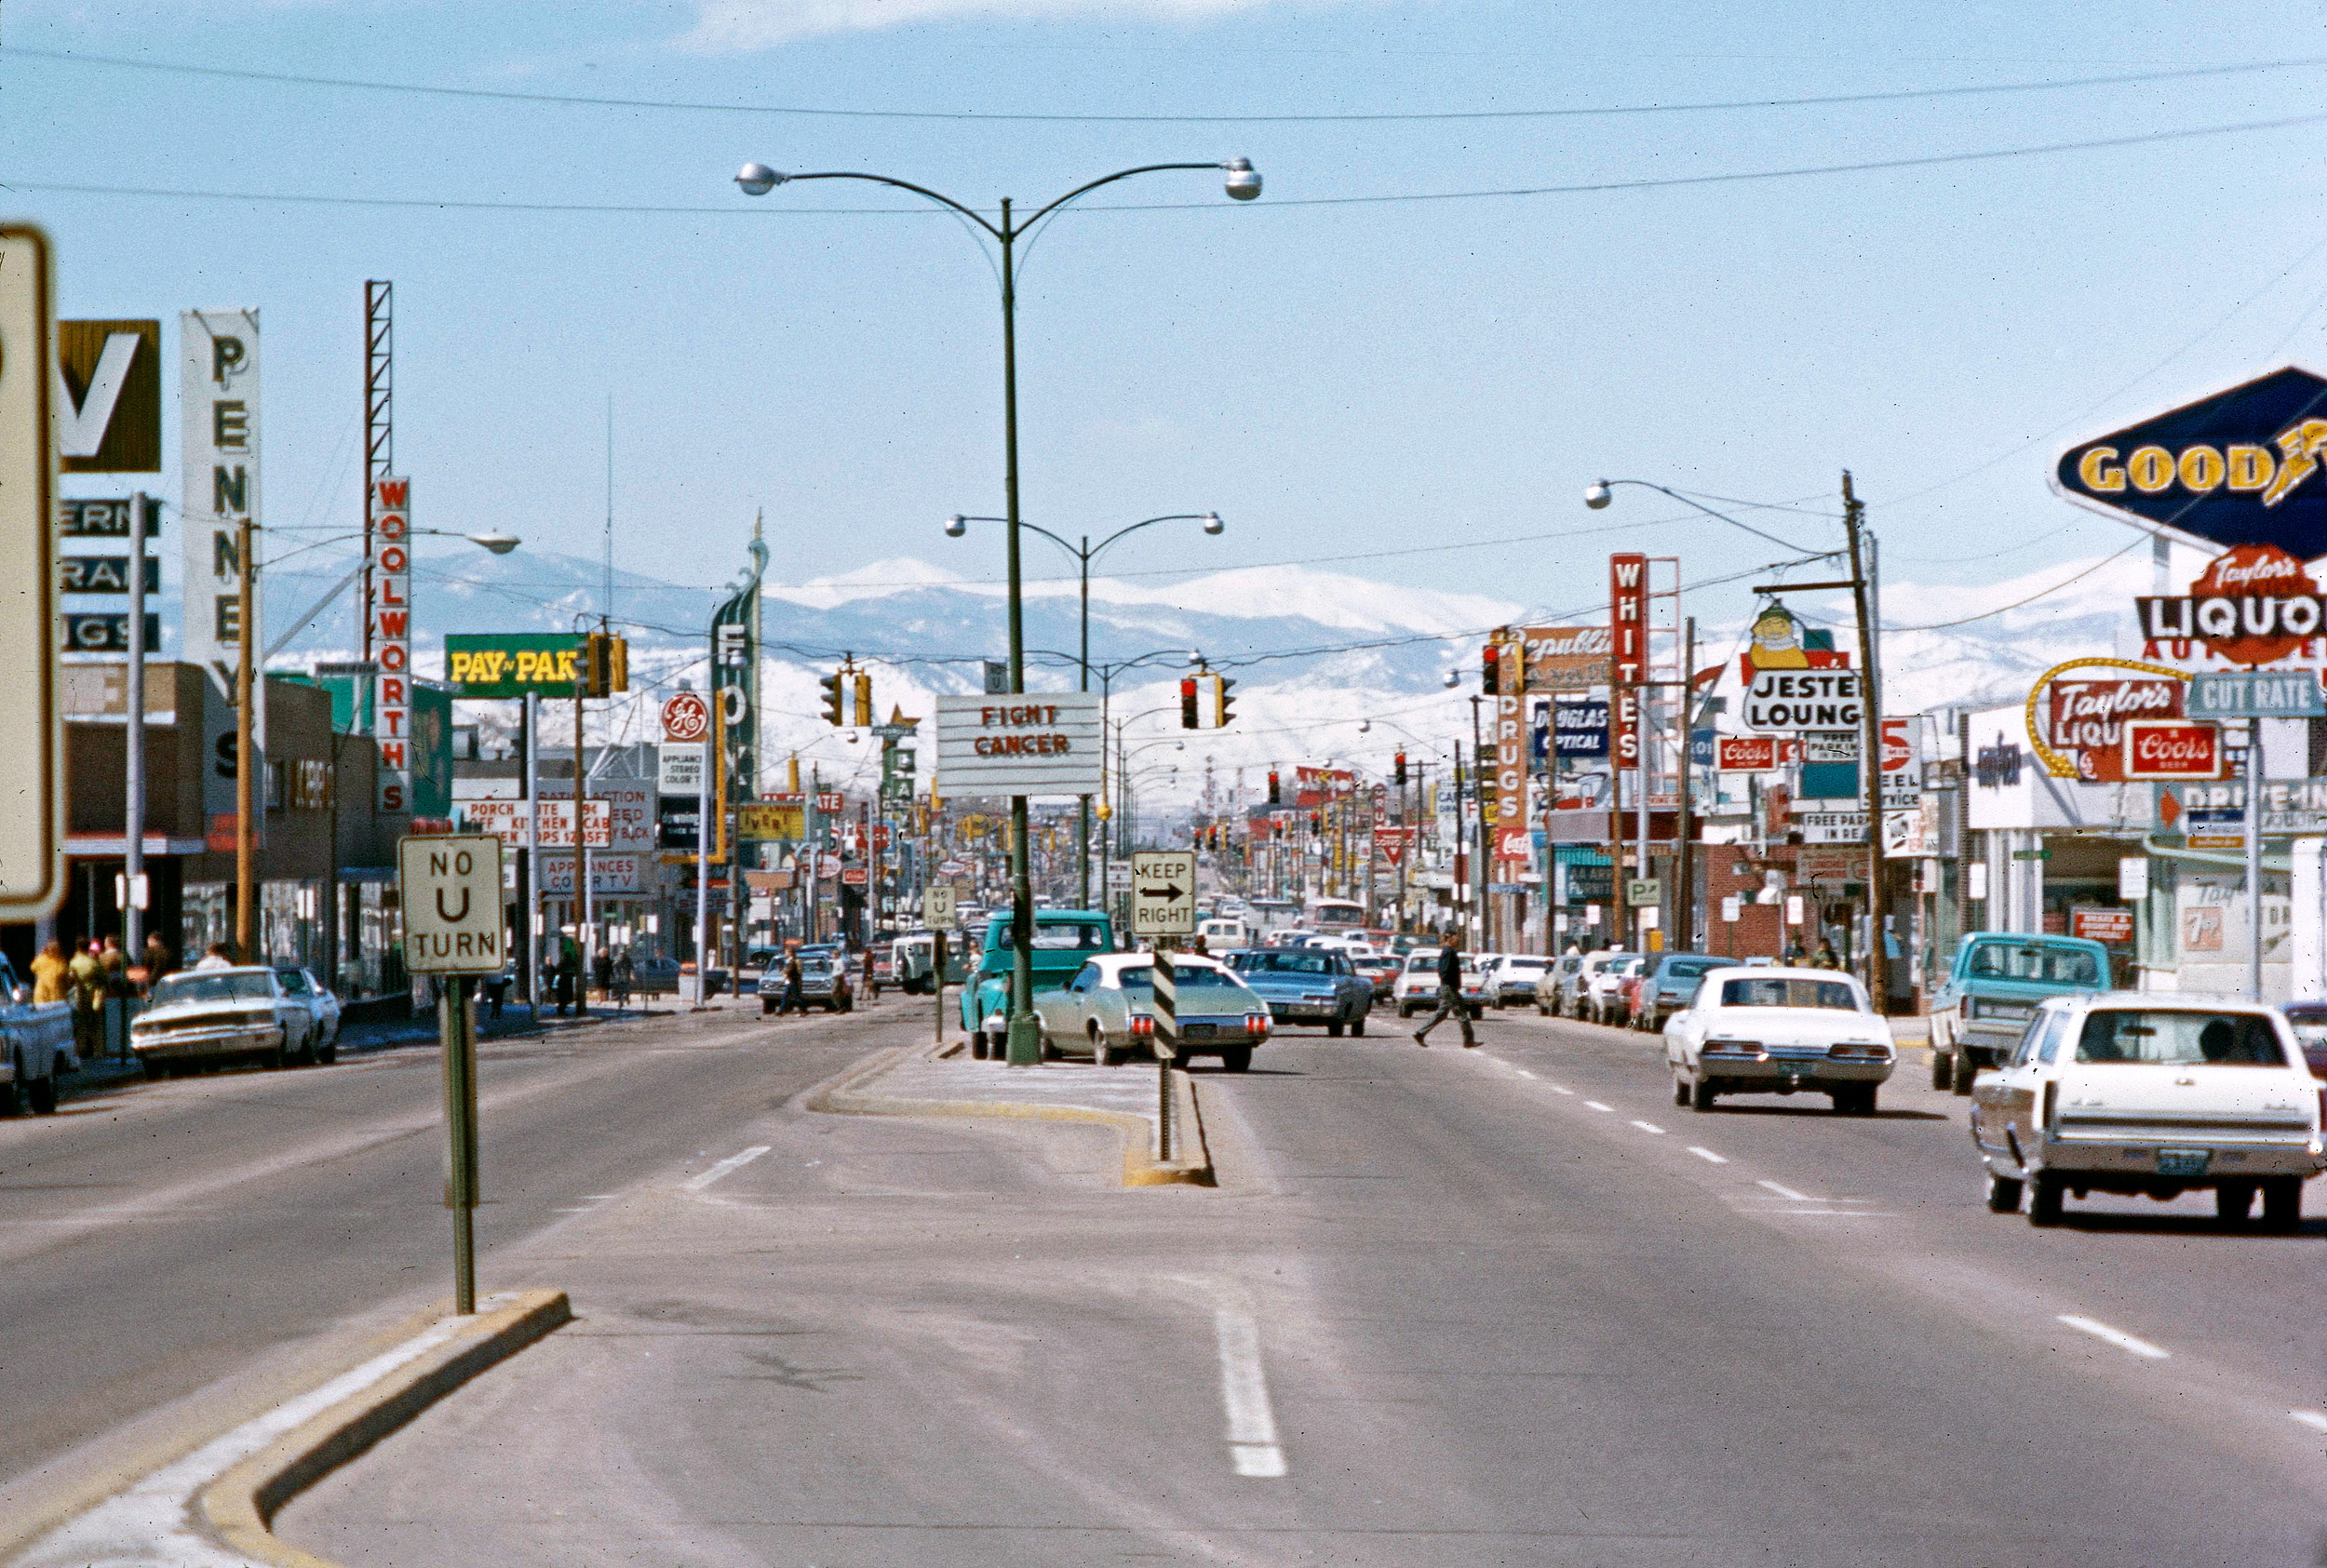 Colfax Avenue in Aurora, Colorado, about 1971. We lived there briefly while my dad was serving in the Air Force at Lowry AFB in Denver. I wish the image was a bit crisper, however, this is remarkable to me mainly for how starkly different it looks today, and how chaotic it looked back in the day. View full size.